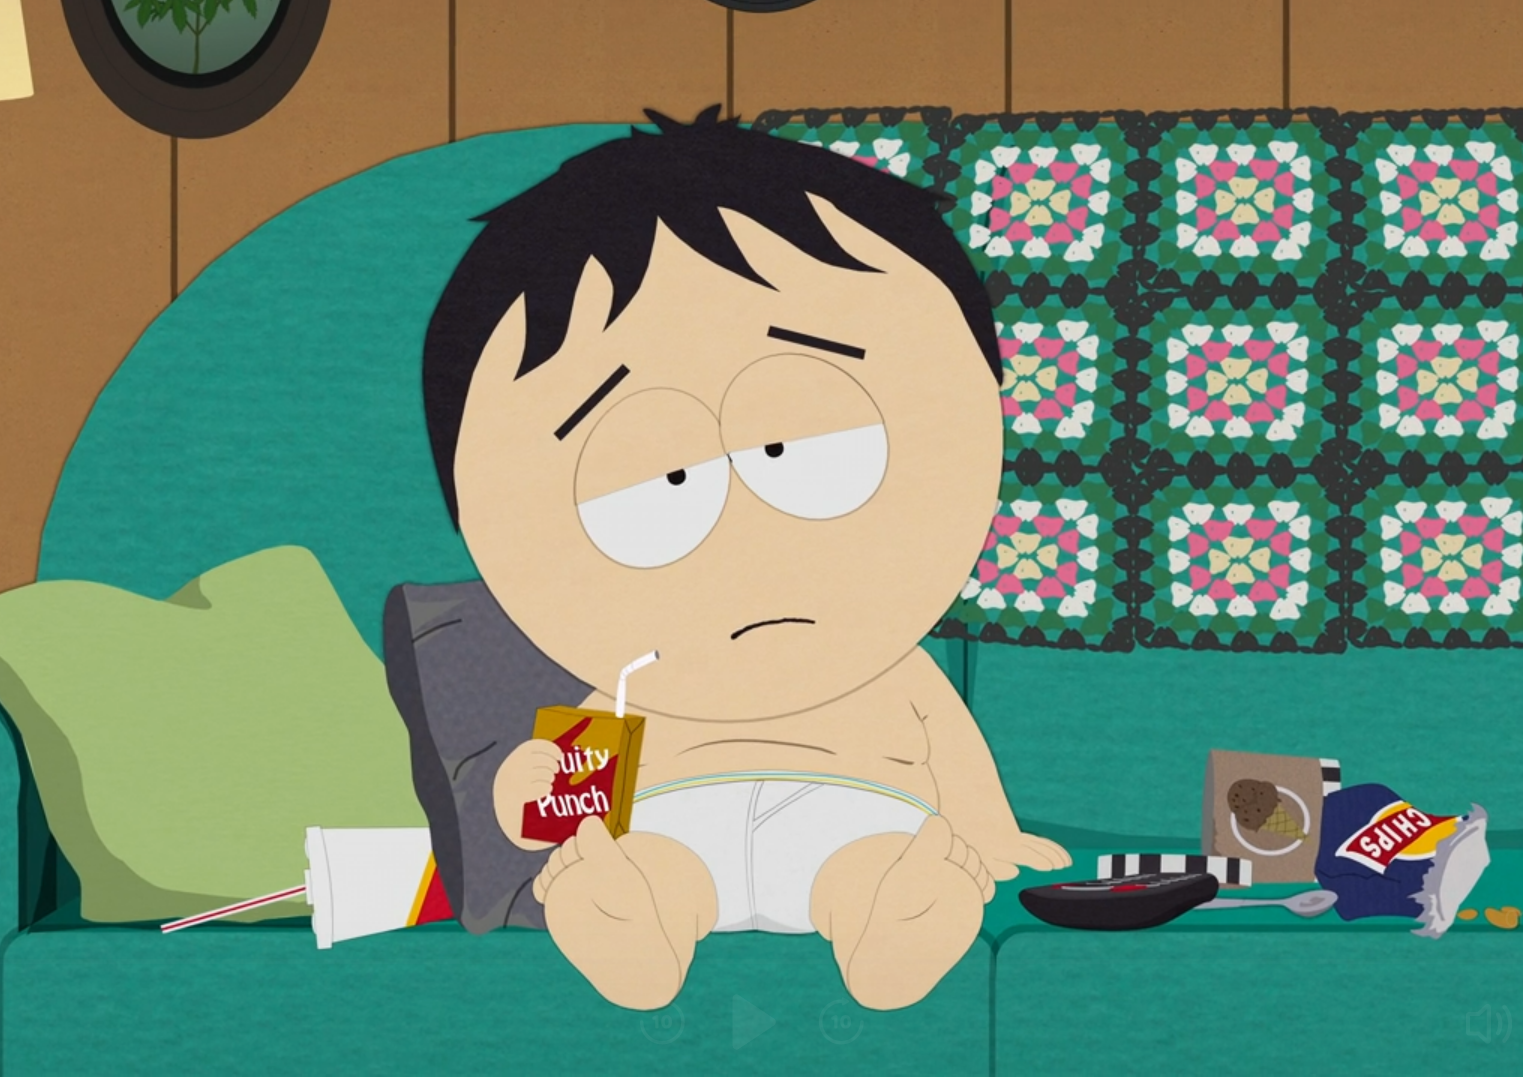 South Park: Post Covid: The Return of Covid Picture